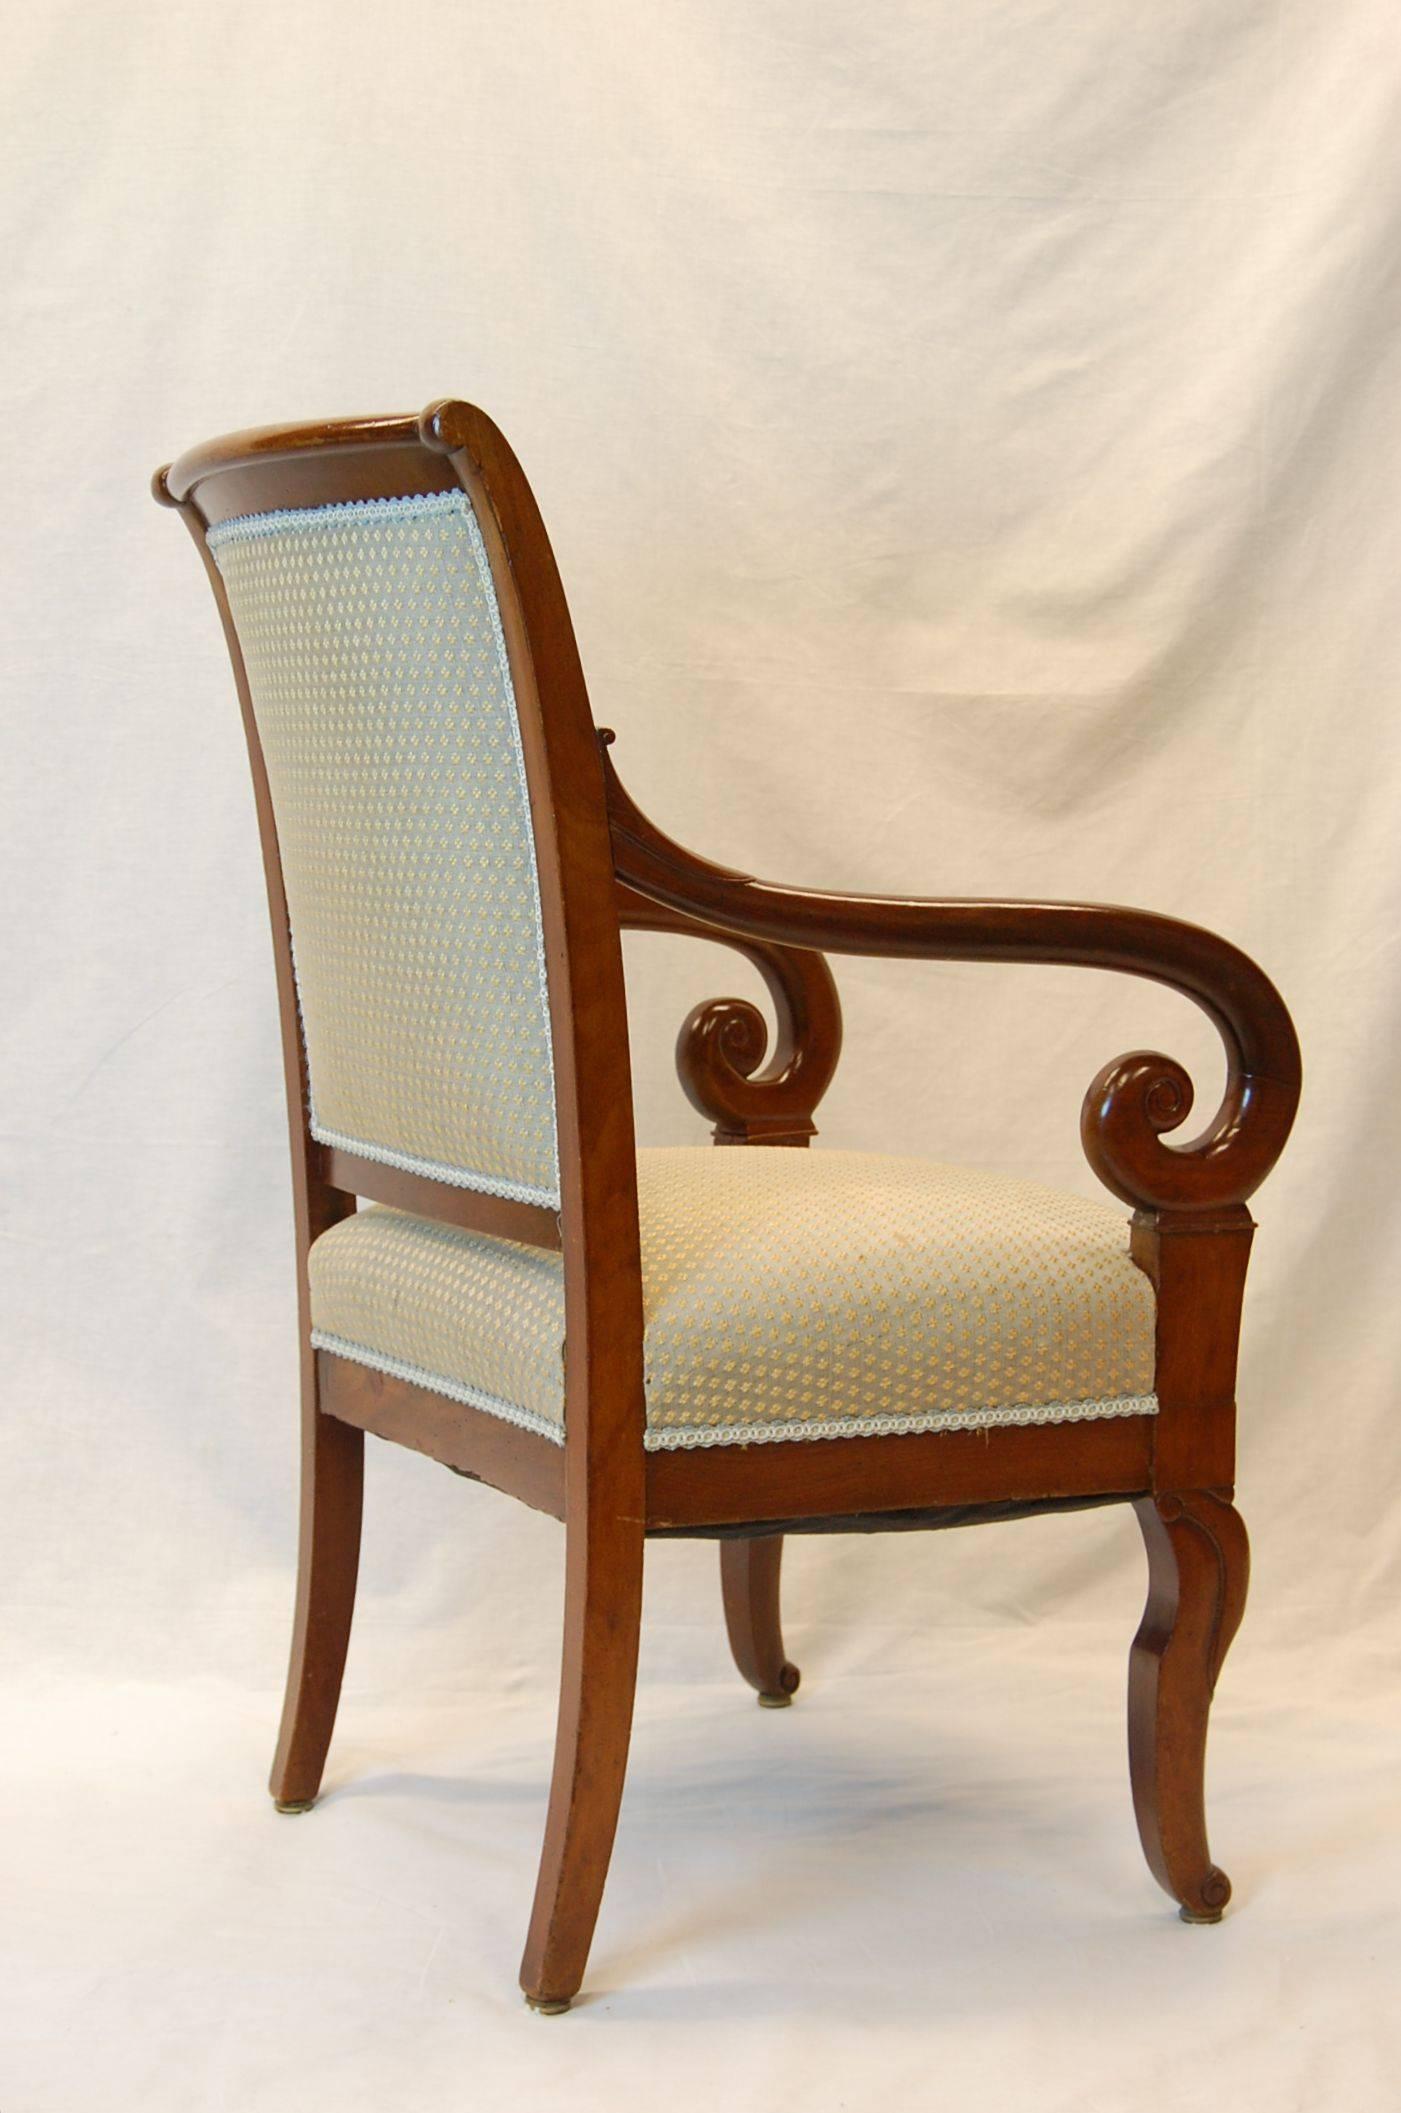 Pair of Carved Mahogany Restauration Period Armchairs, Early 19th Century For Sale 2